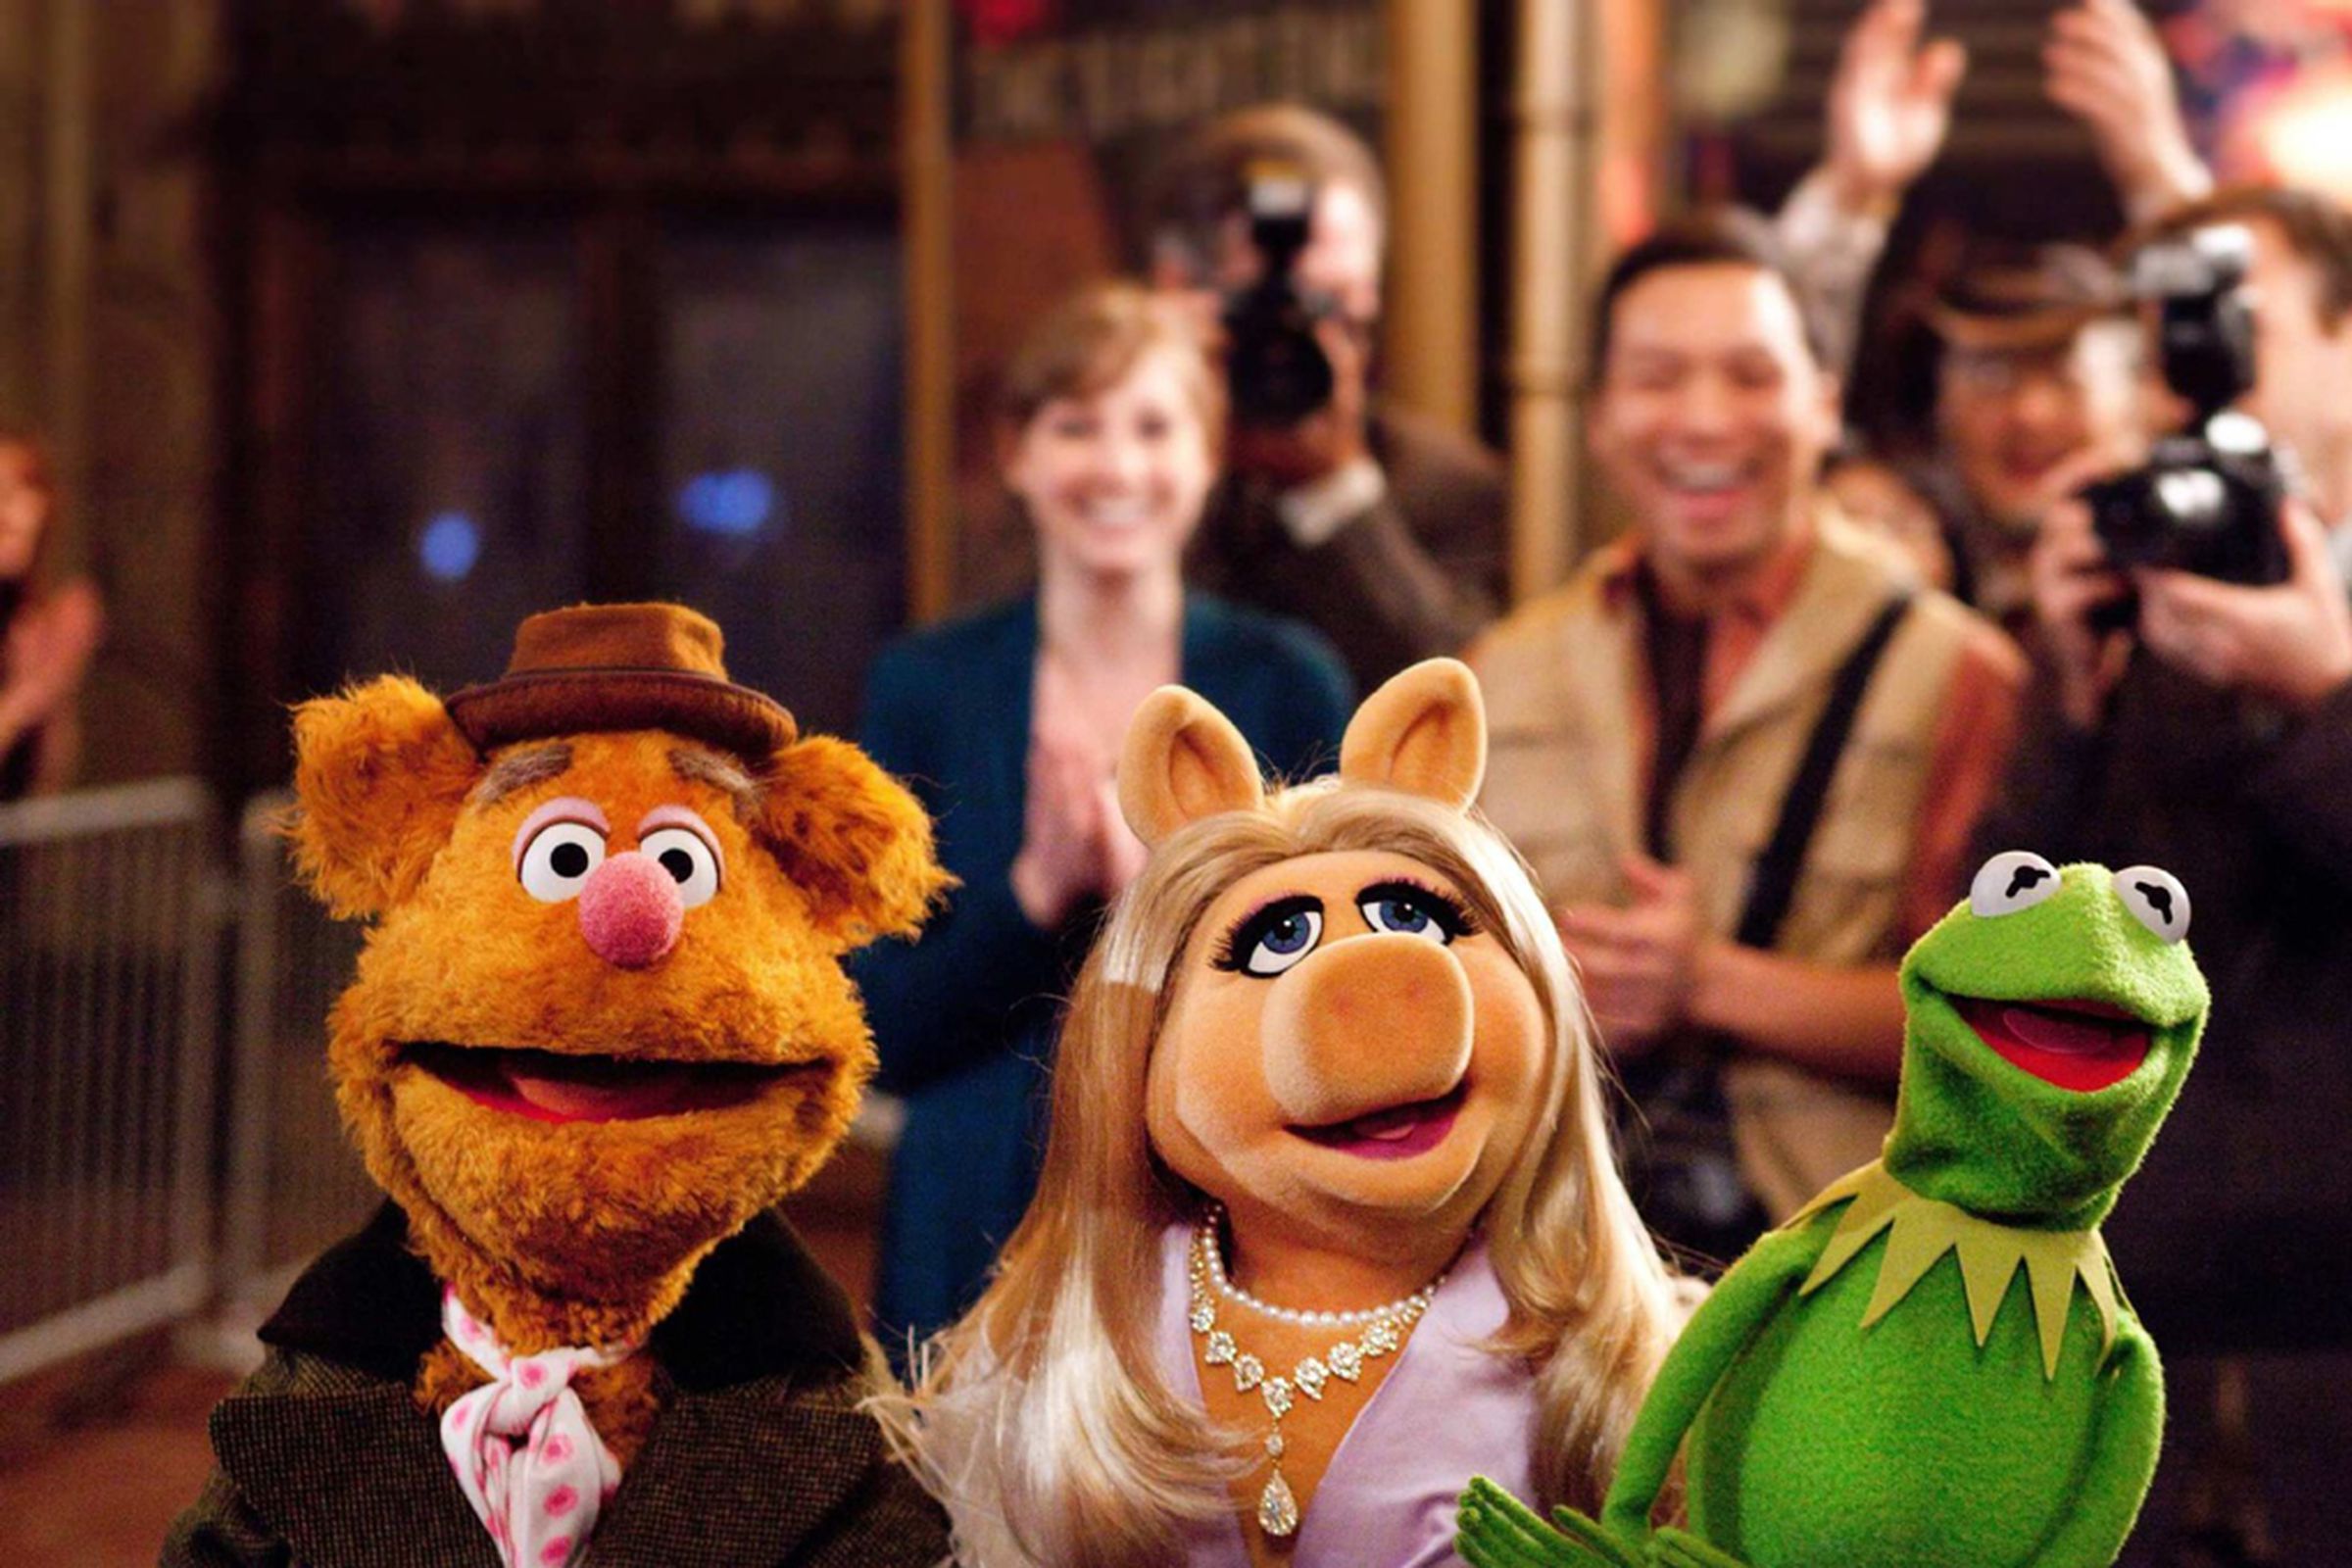 The Muppets promotional still